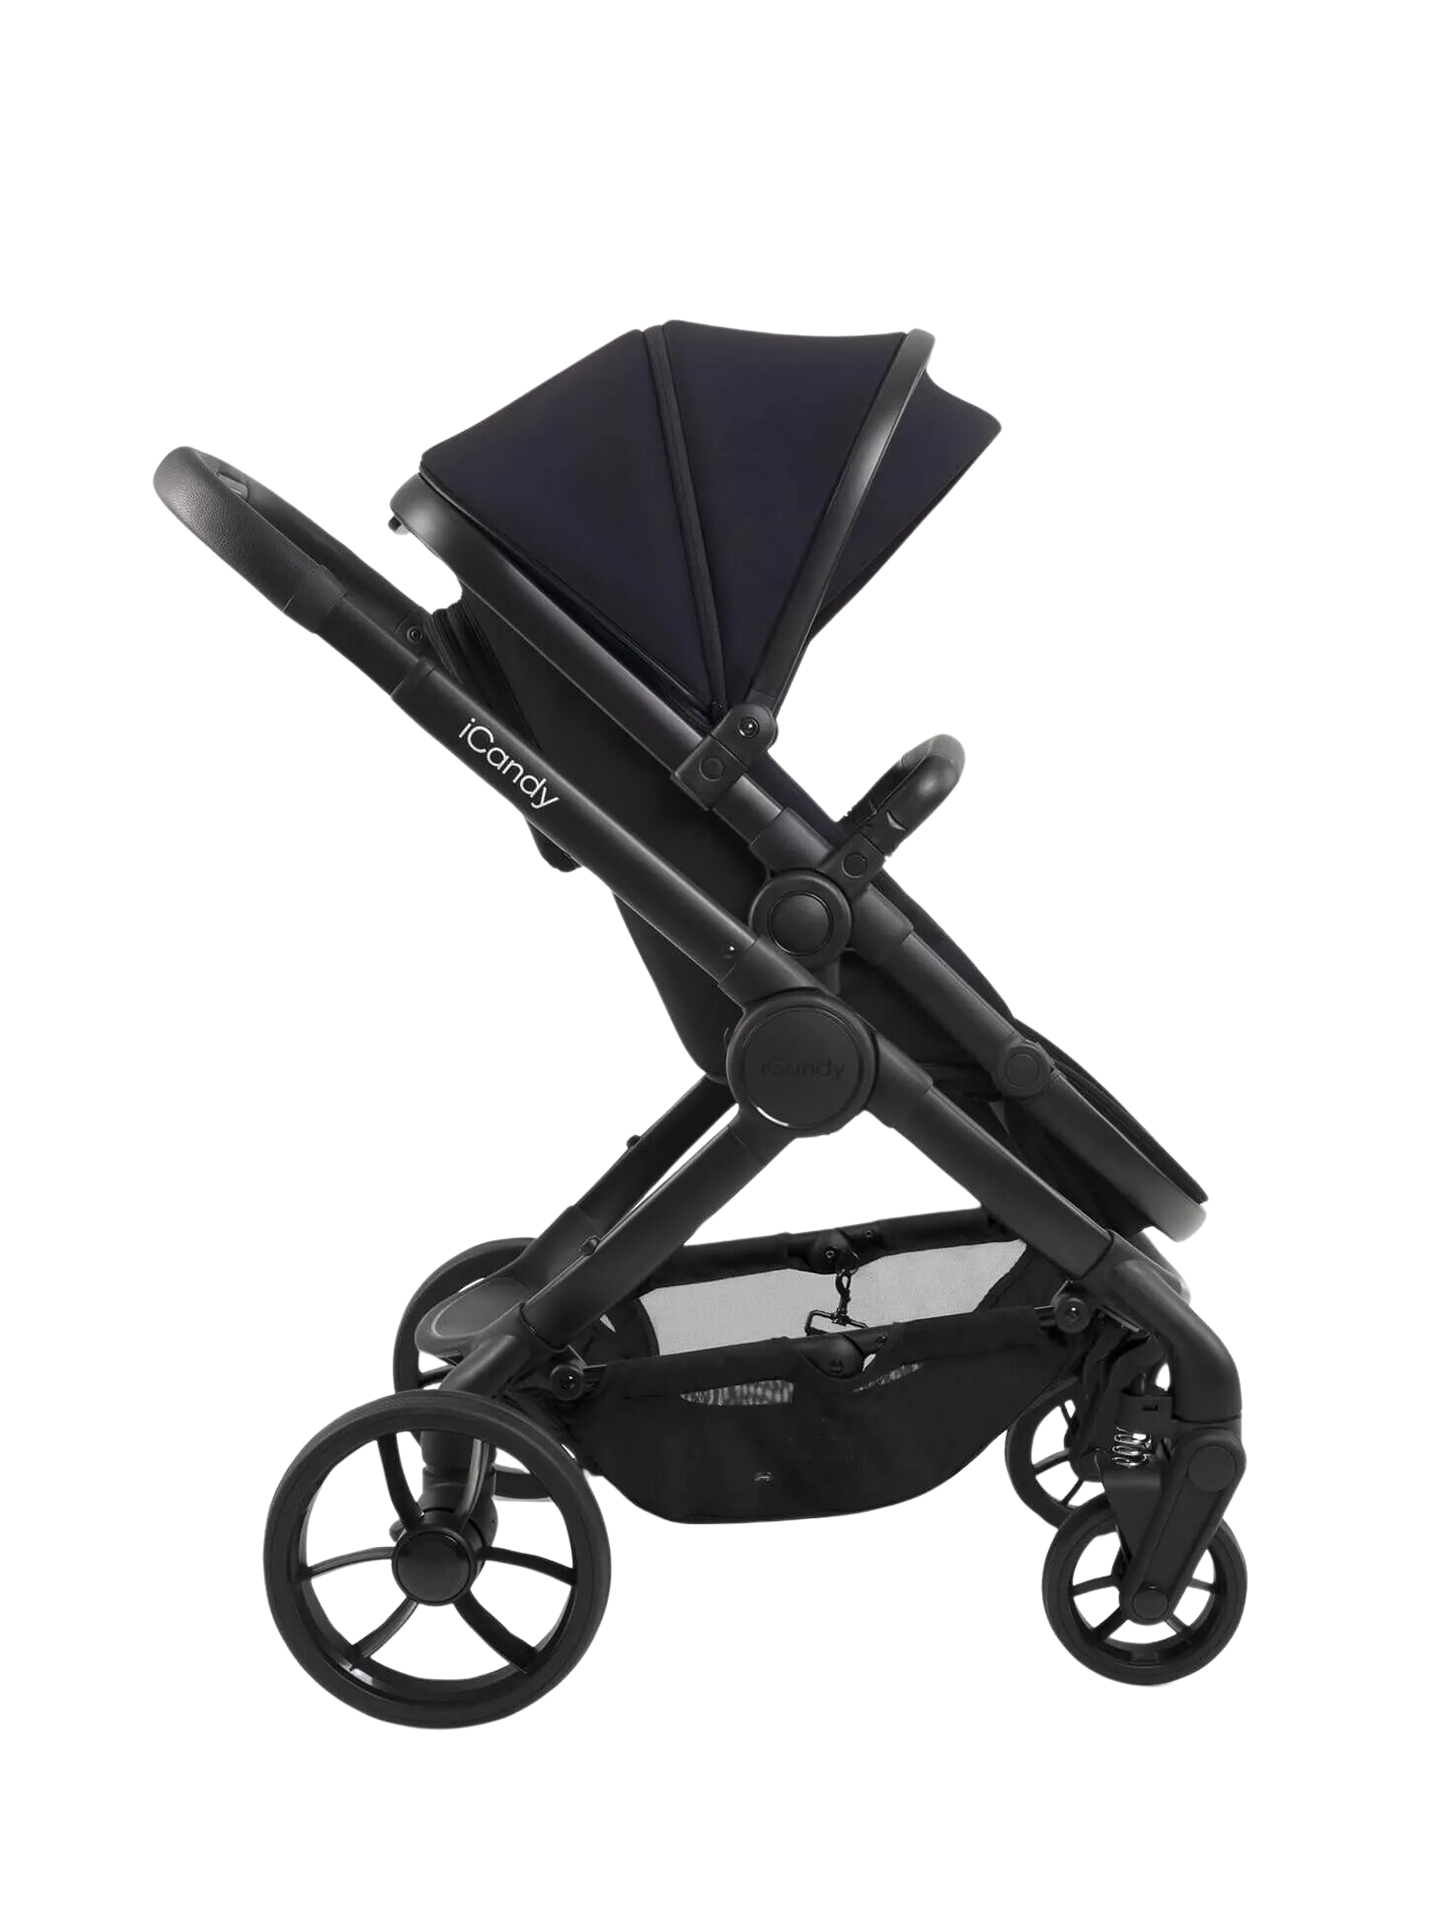 iCandy Peach 7 Single Stroller and Bassinet - Black